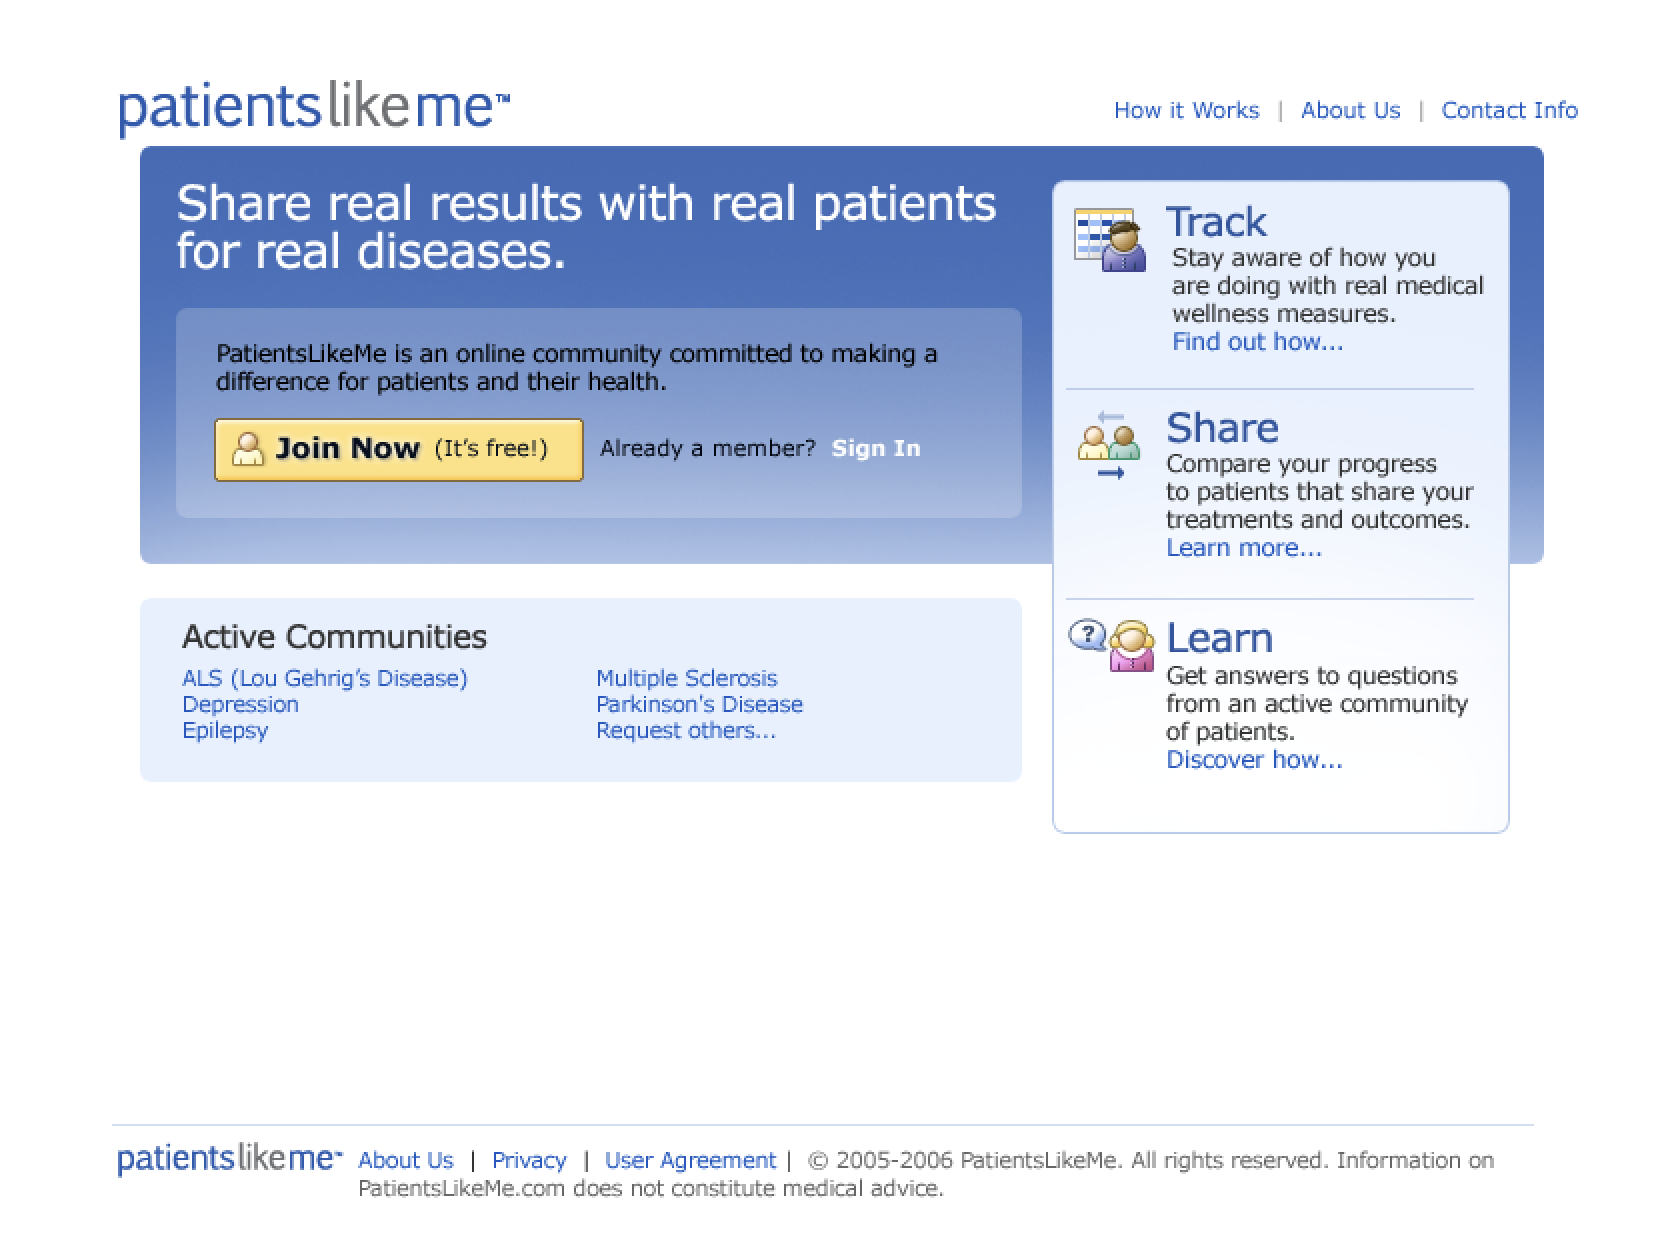 PatientsLikeMe home page v4 from 2006